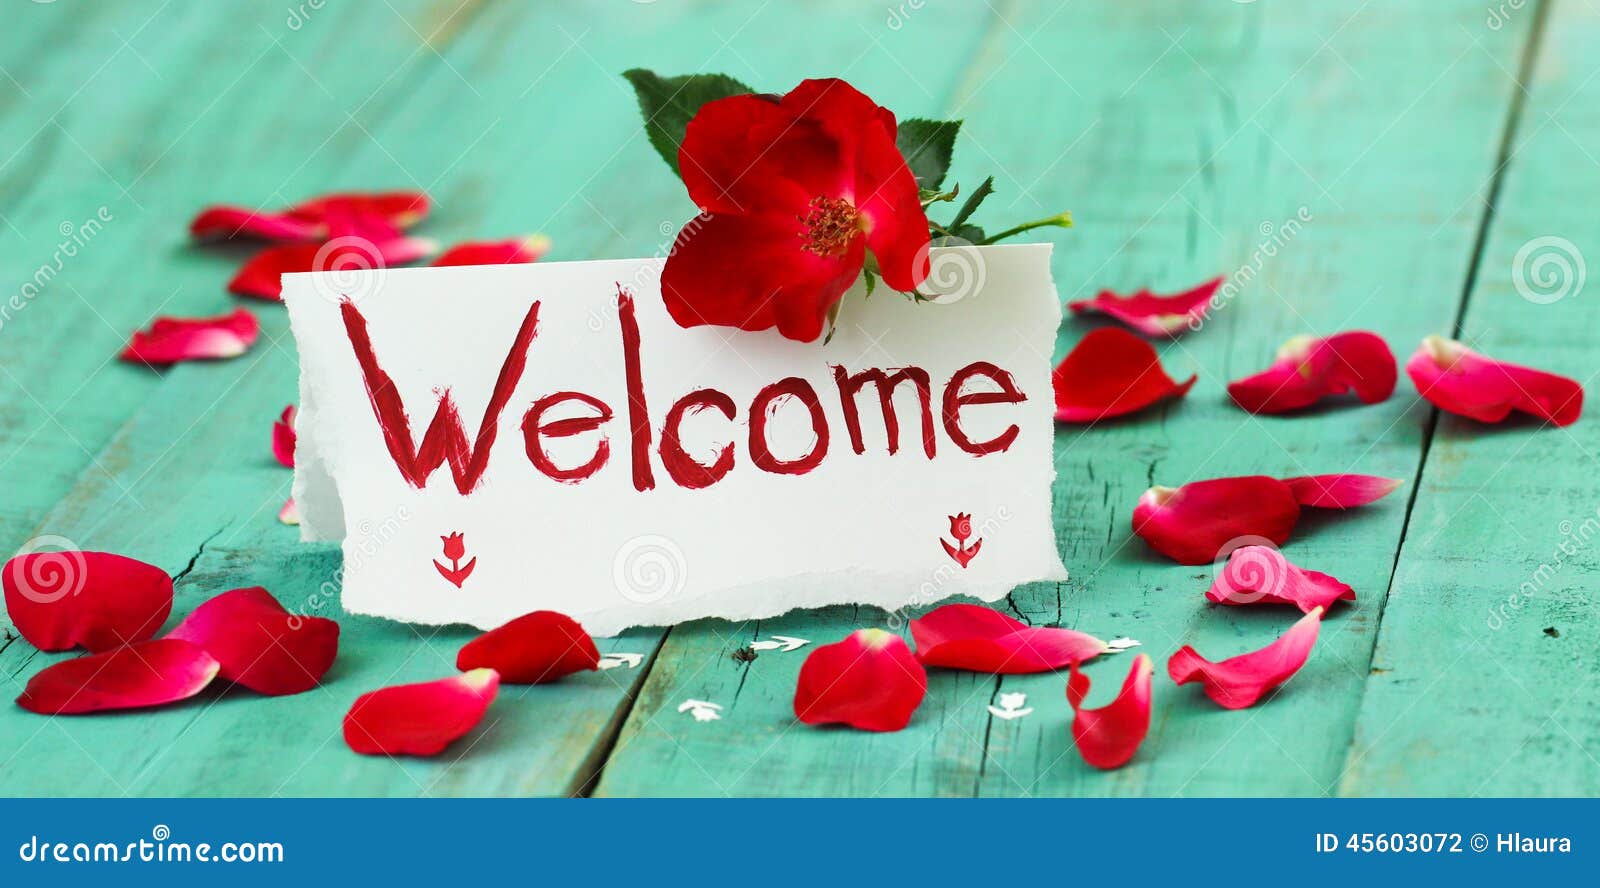 red-white-welcome-place-card-red-flower-rose-petals-antique-green-rustic-wood-table-tent-note-roses-teal-blue-45603072.jpg